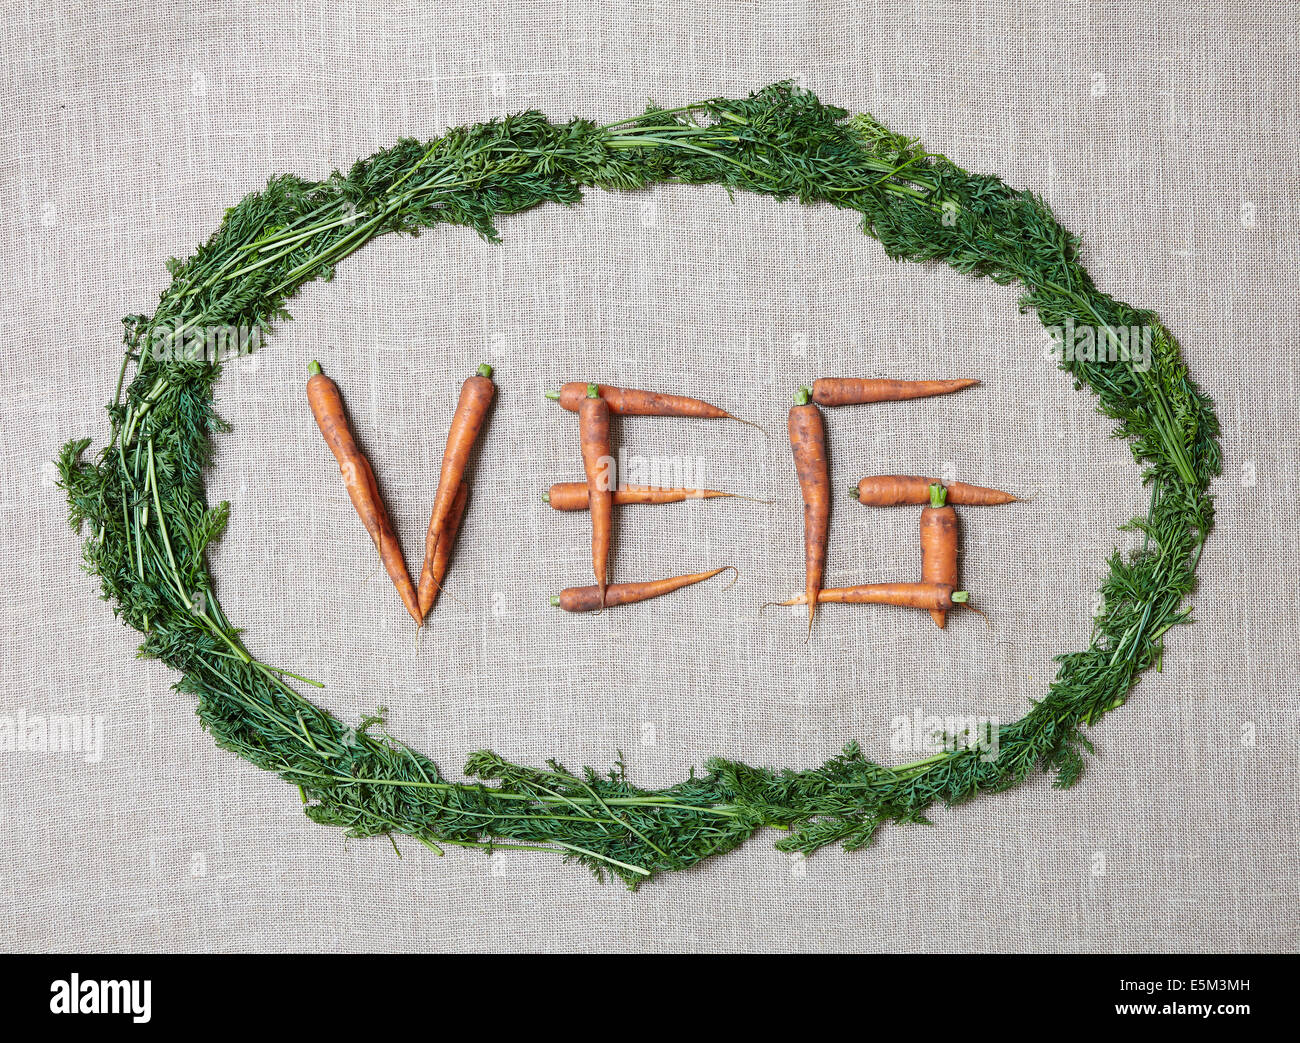 'Veg' spelt out with organic carrots Stock Photo